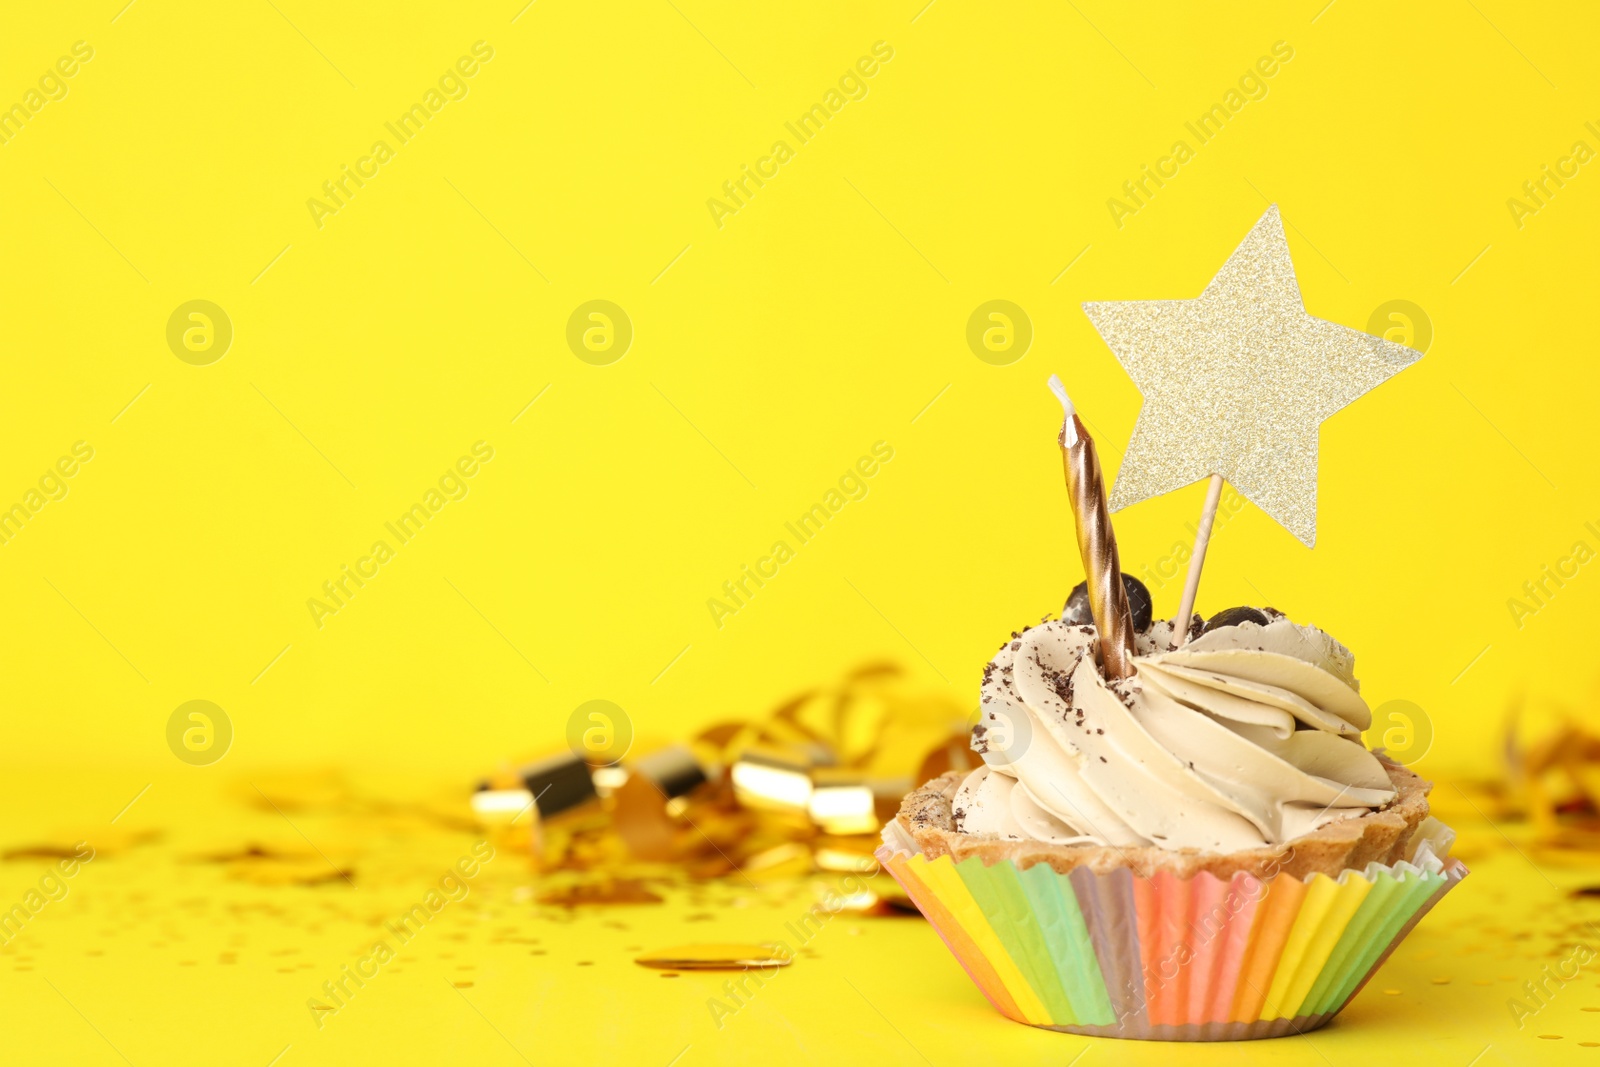 Photo of Birthday cupcake with candle on yellow background, space for text